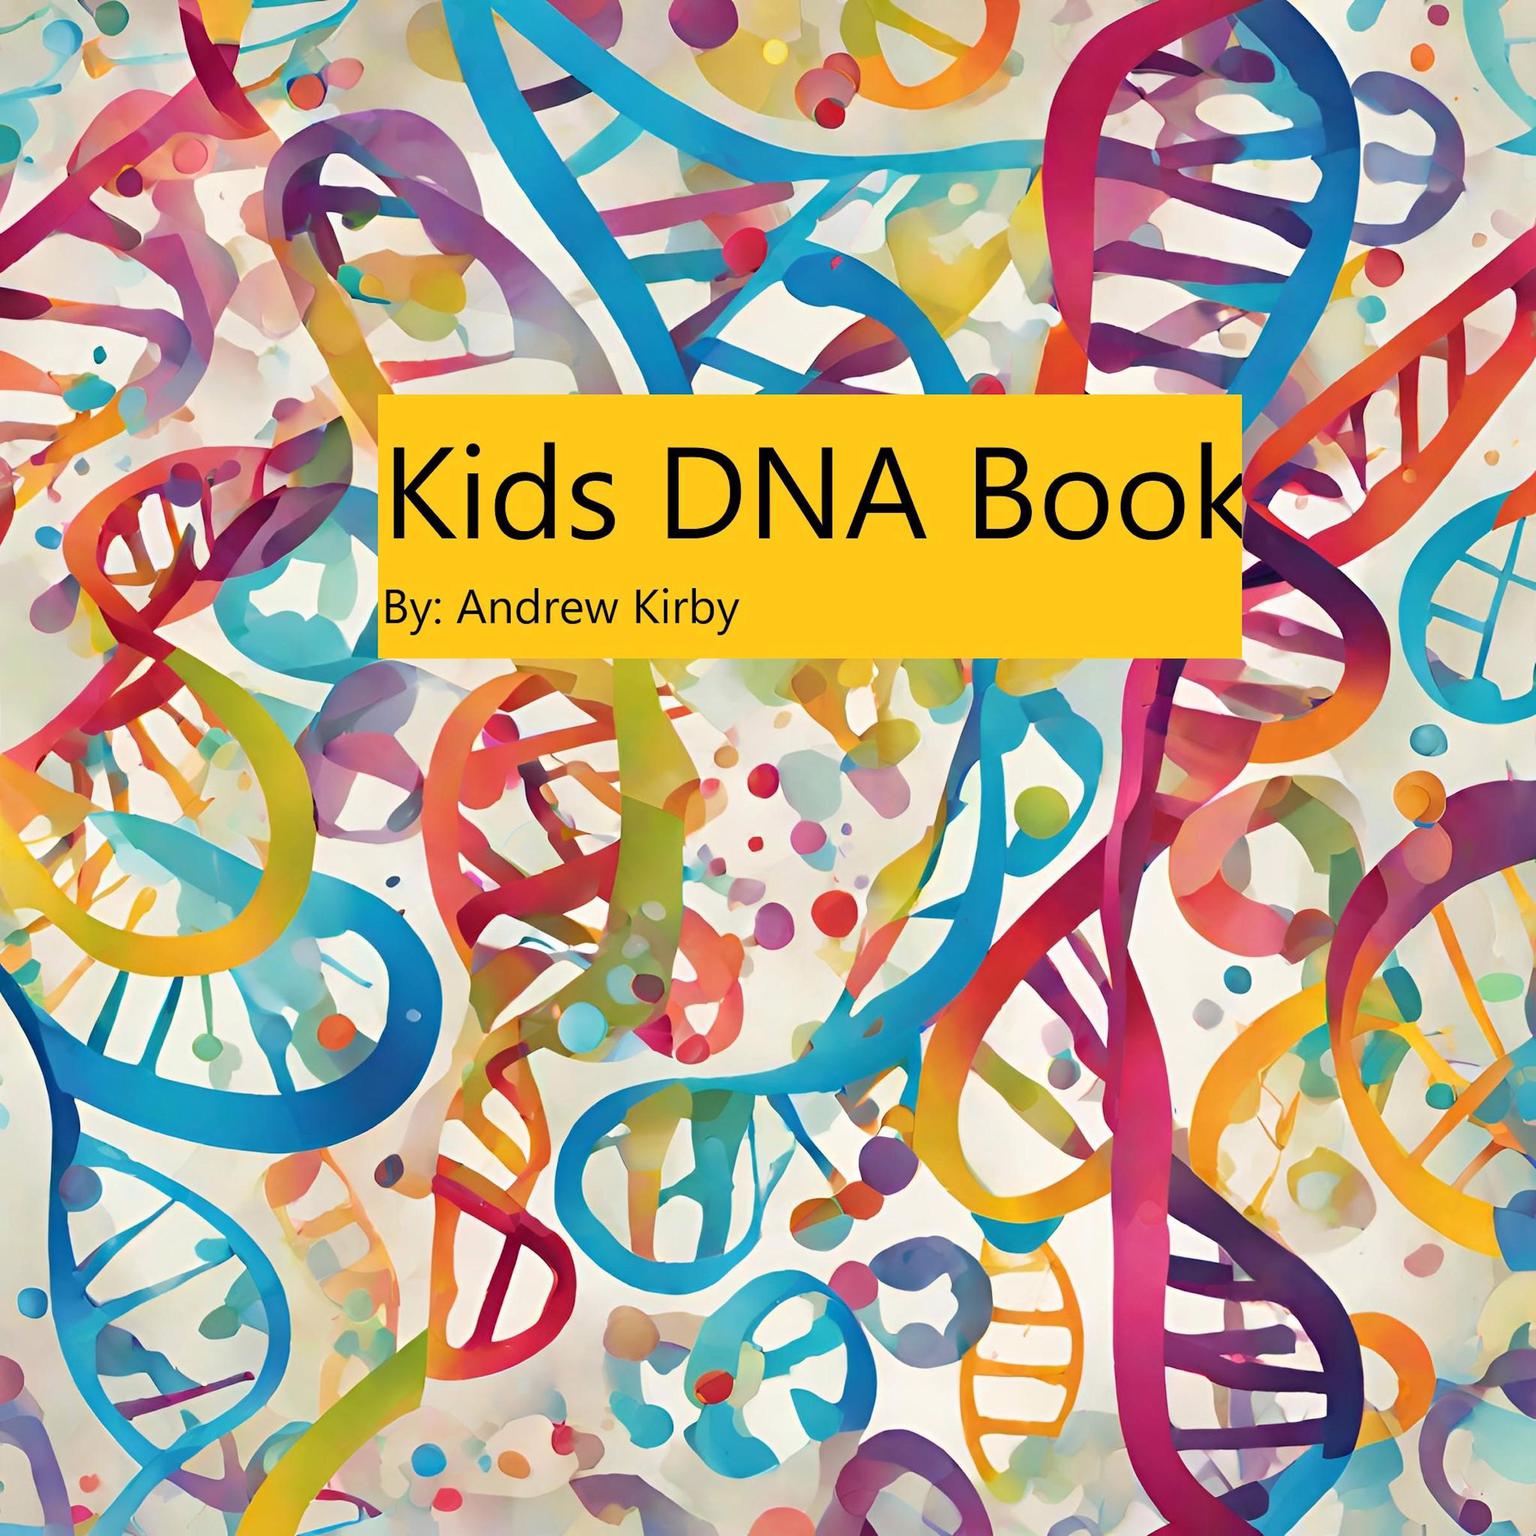 Kids DNA Book Audiobook, by Andrew Kirby